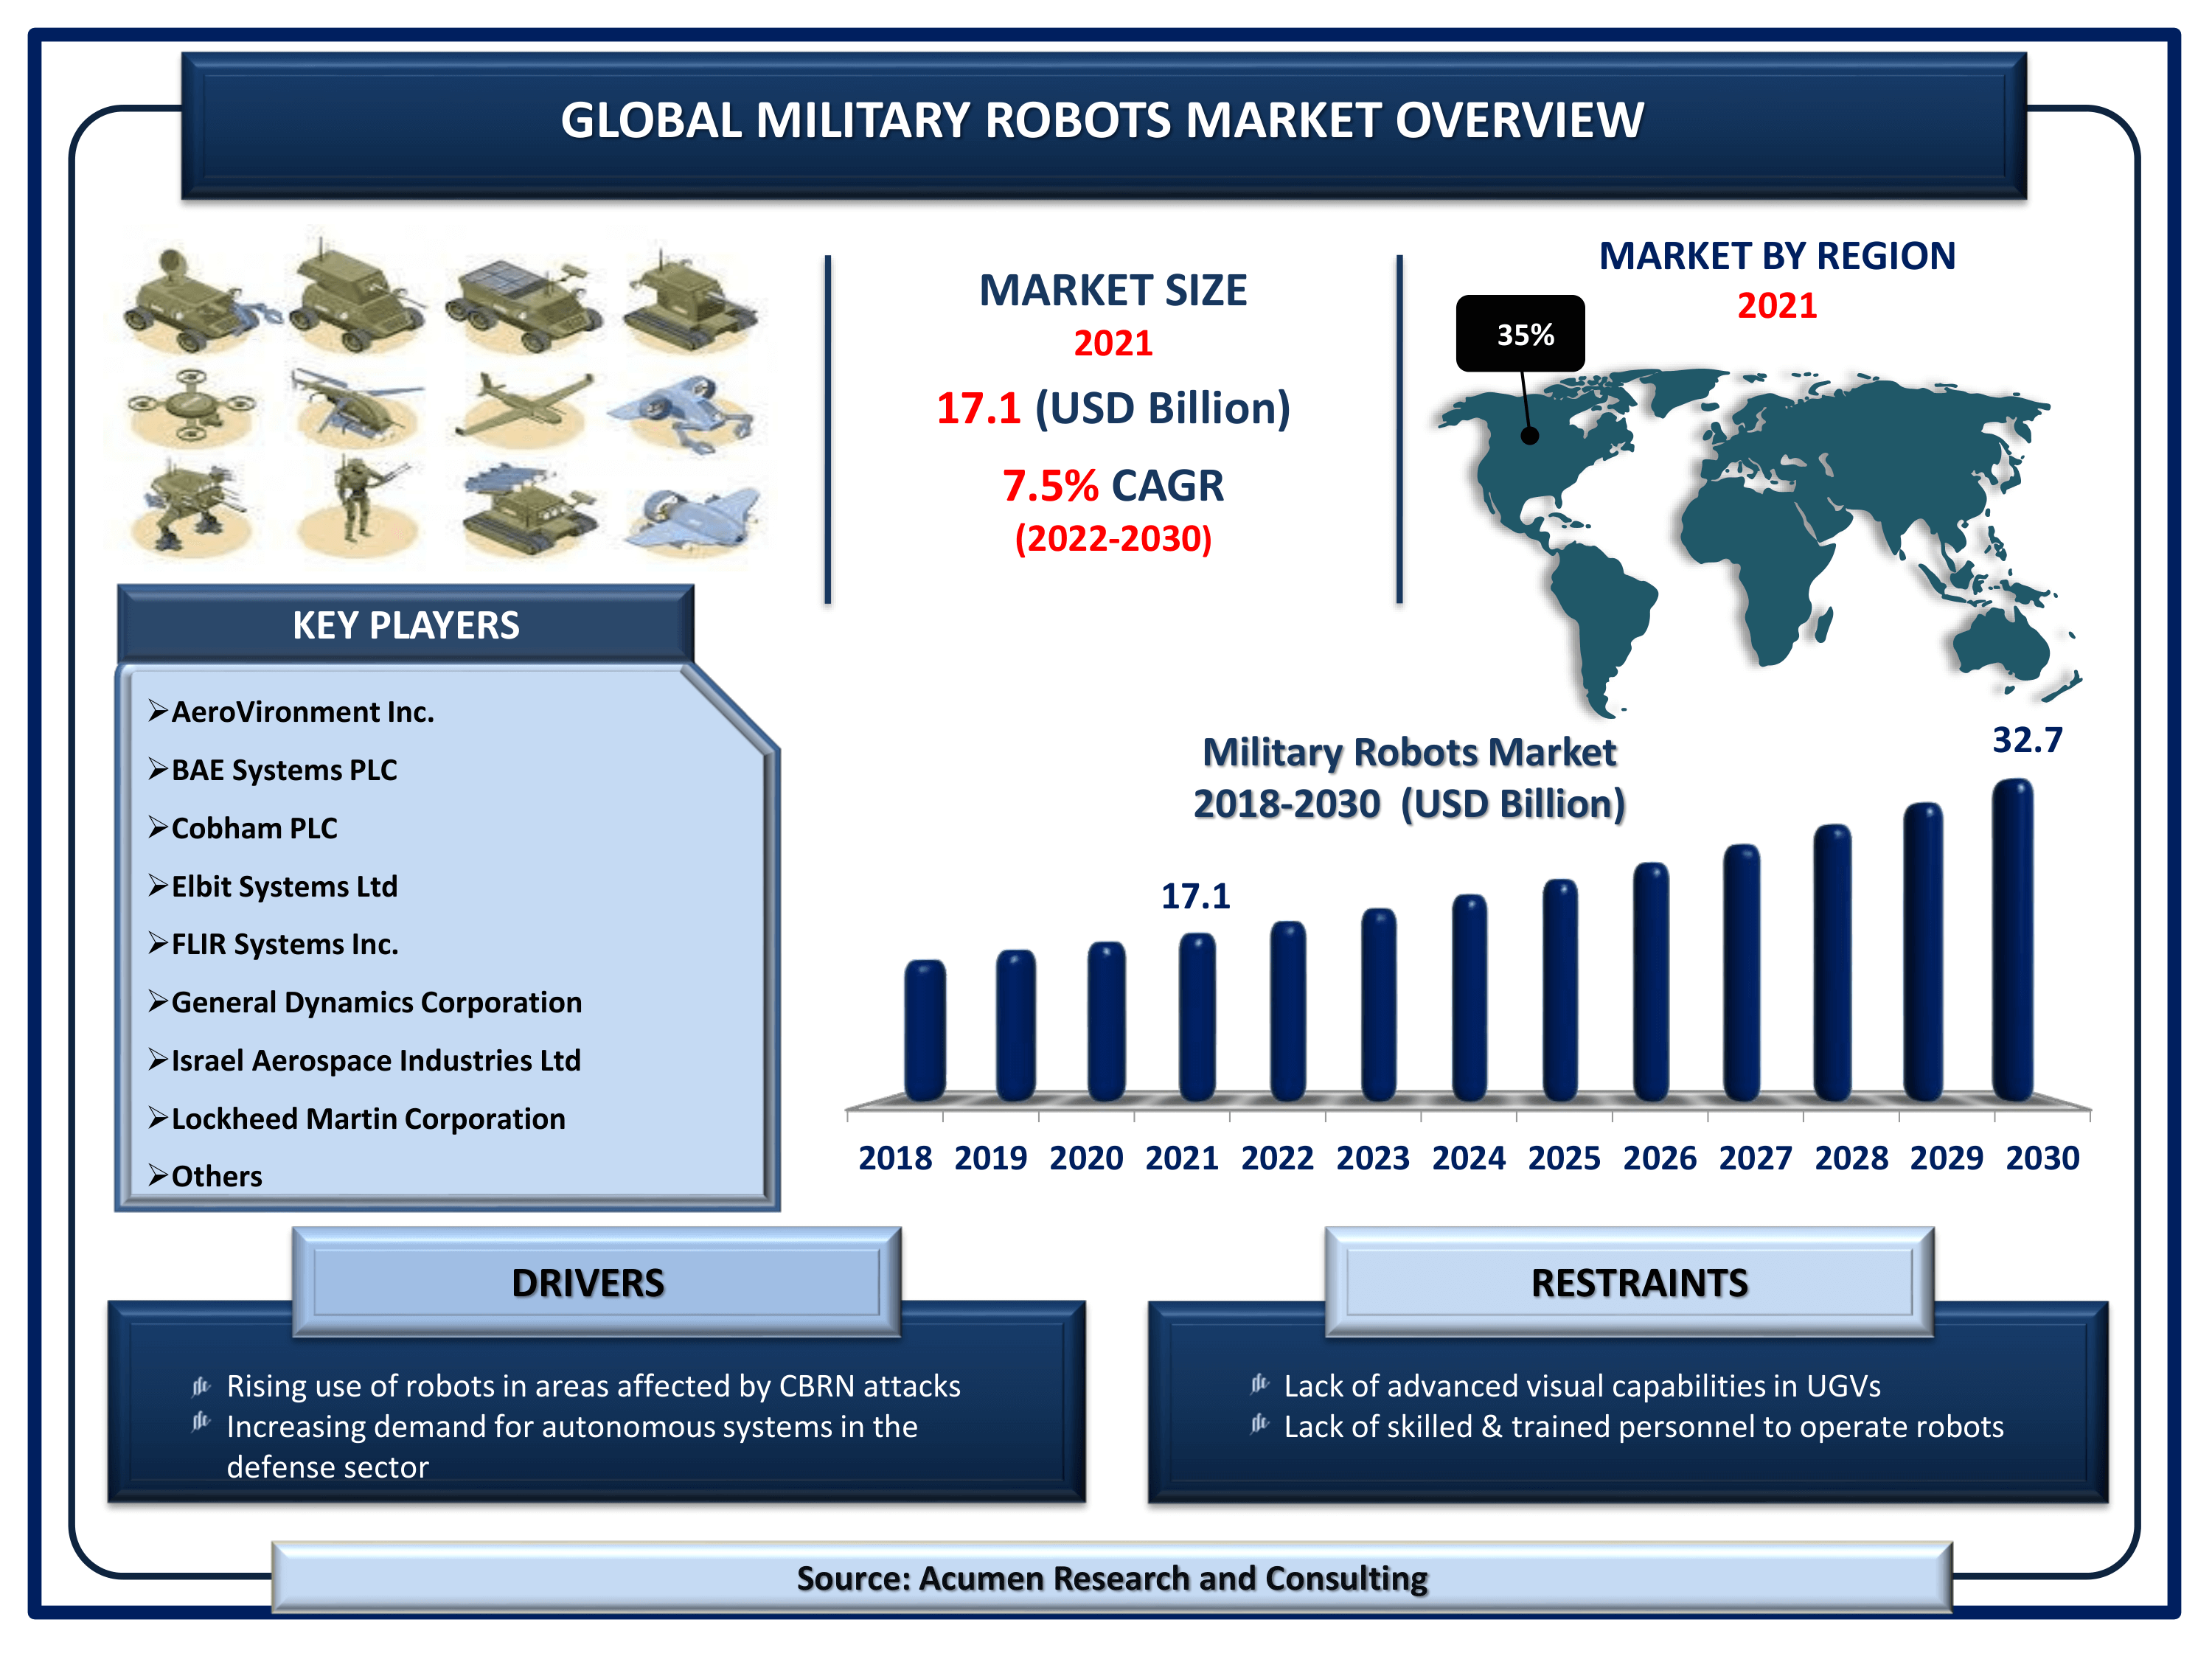 Global military robots market revenue is estimated to reach USD 32.7 Billion by 2030 with a CAGR of 7.5% from 2022 to 2030